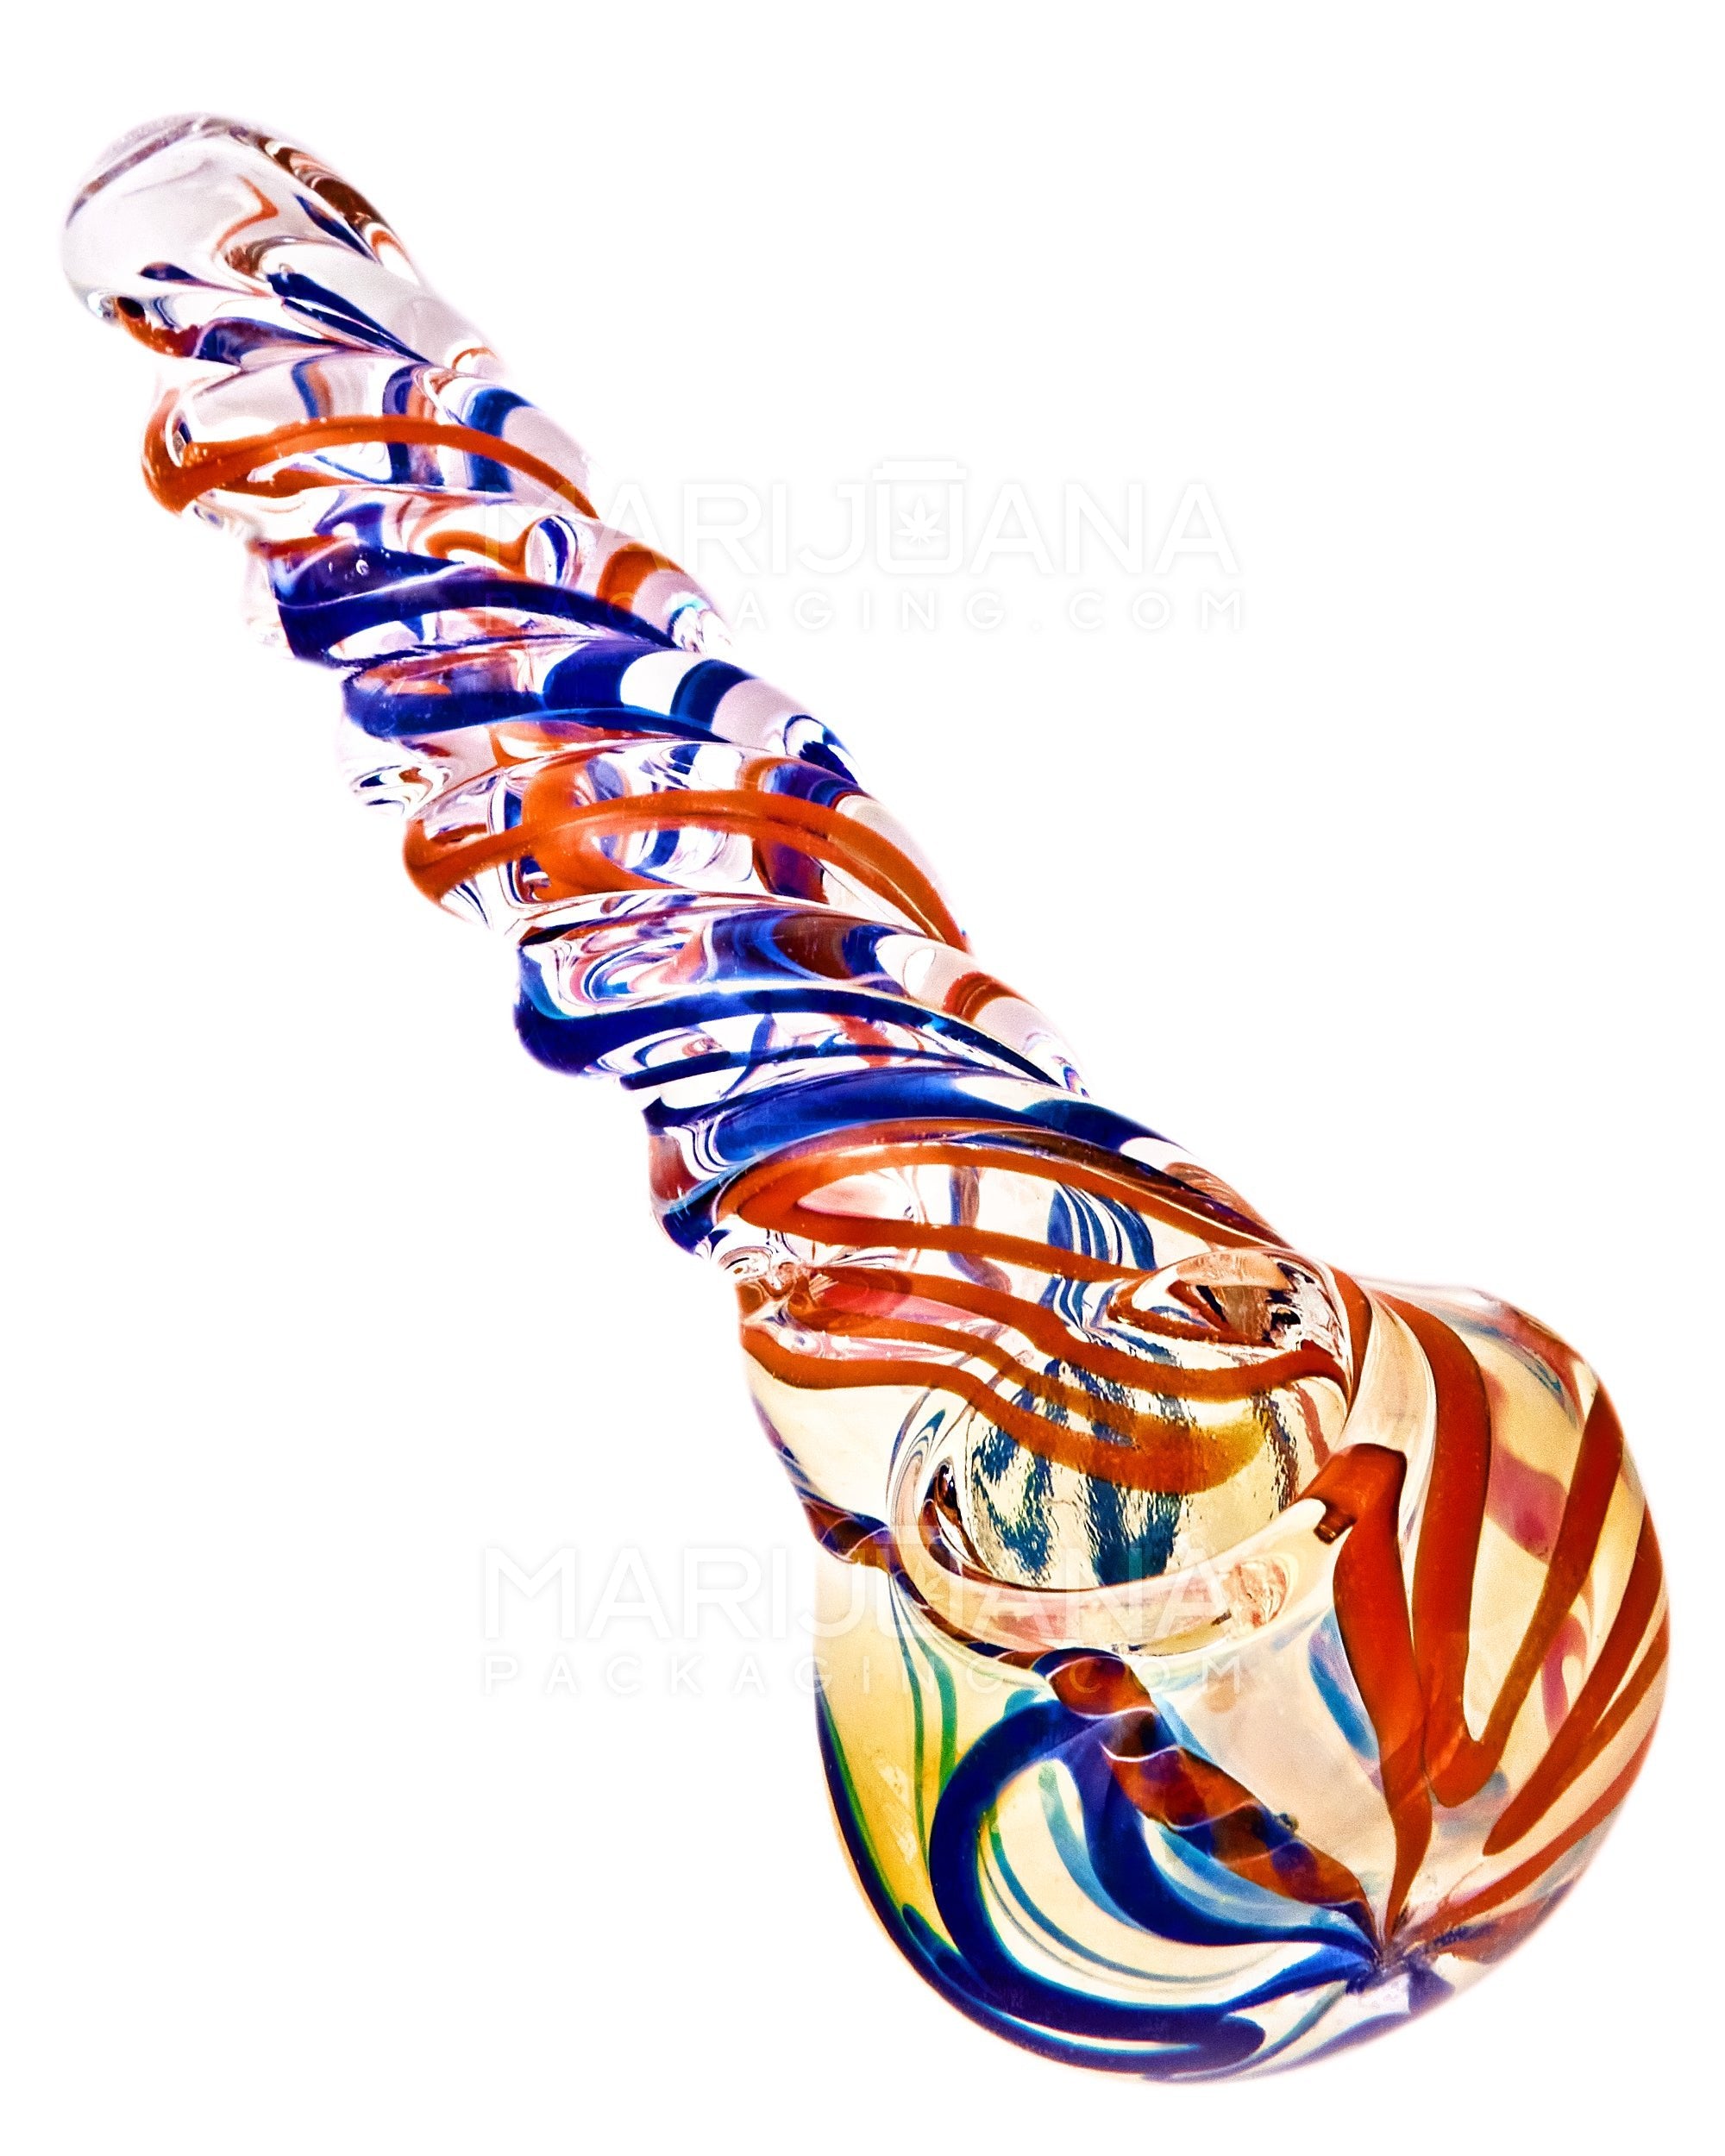 Spiral & Gold Fumed Twist Hand Pipe | 5in Long - Glass - Assorted - 6